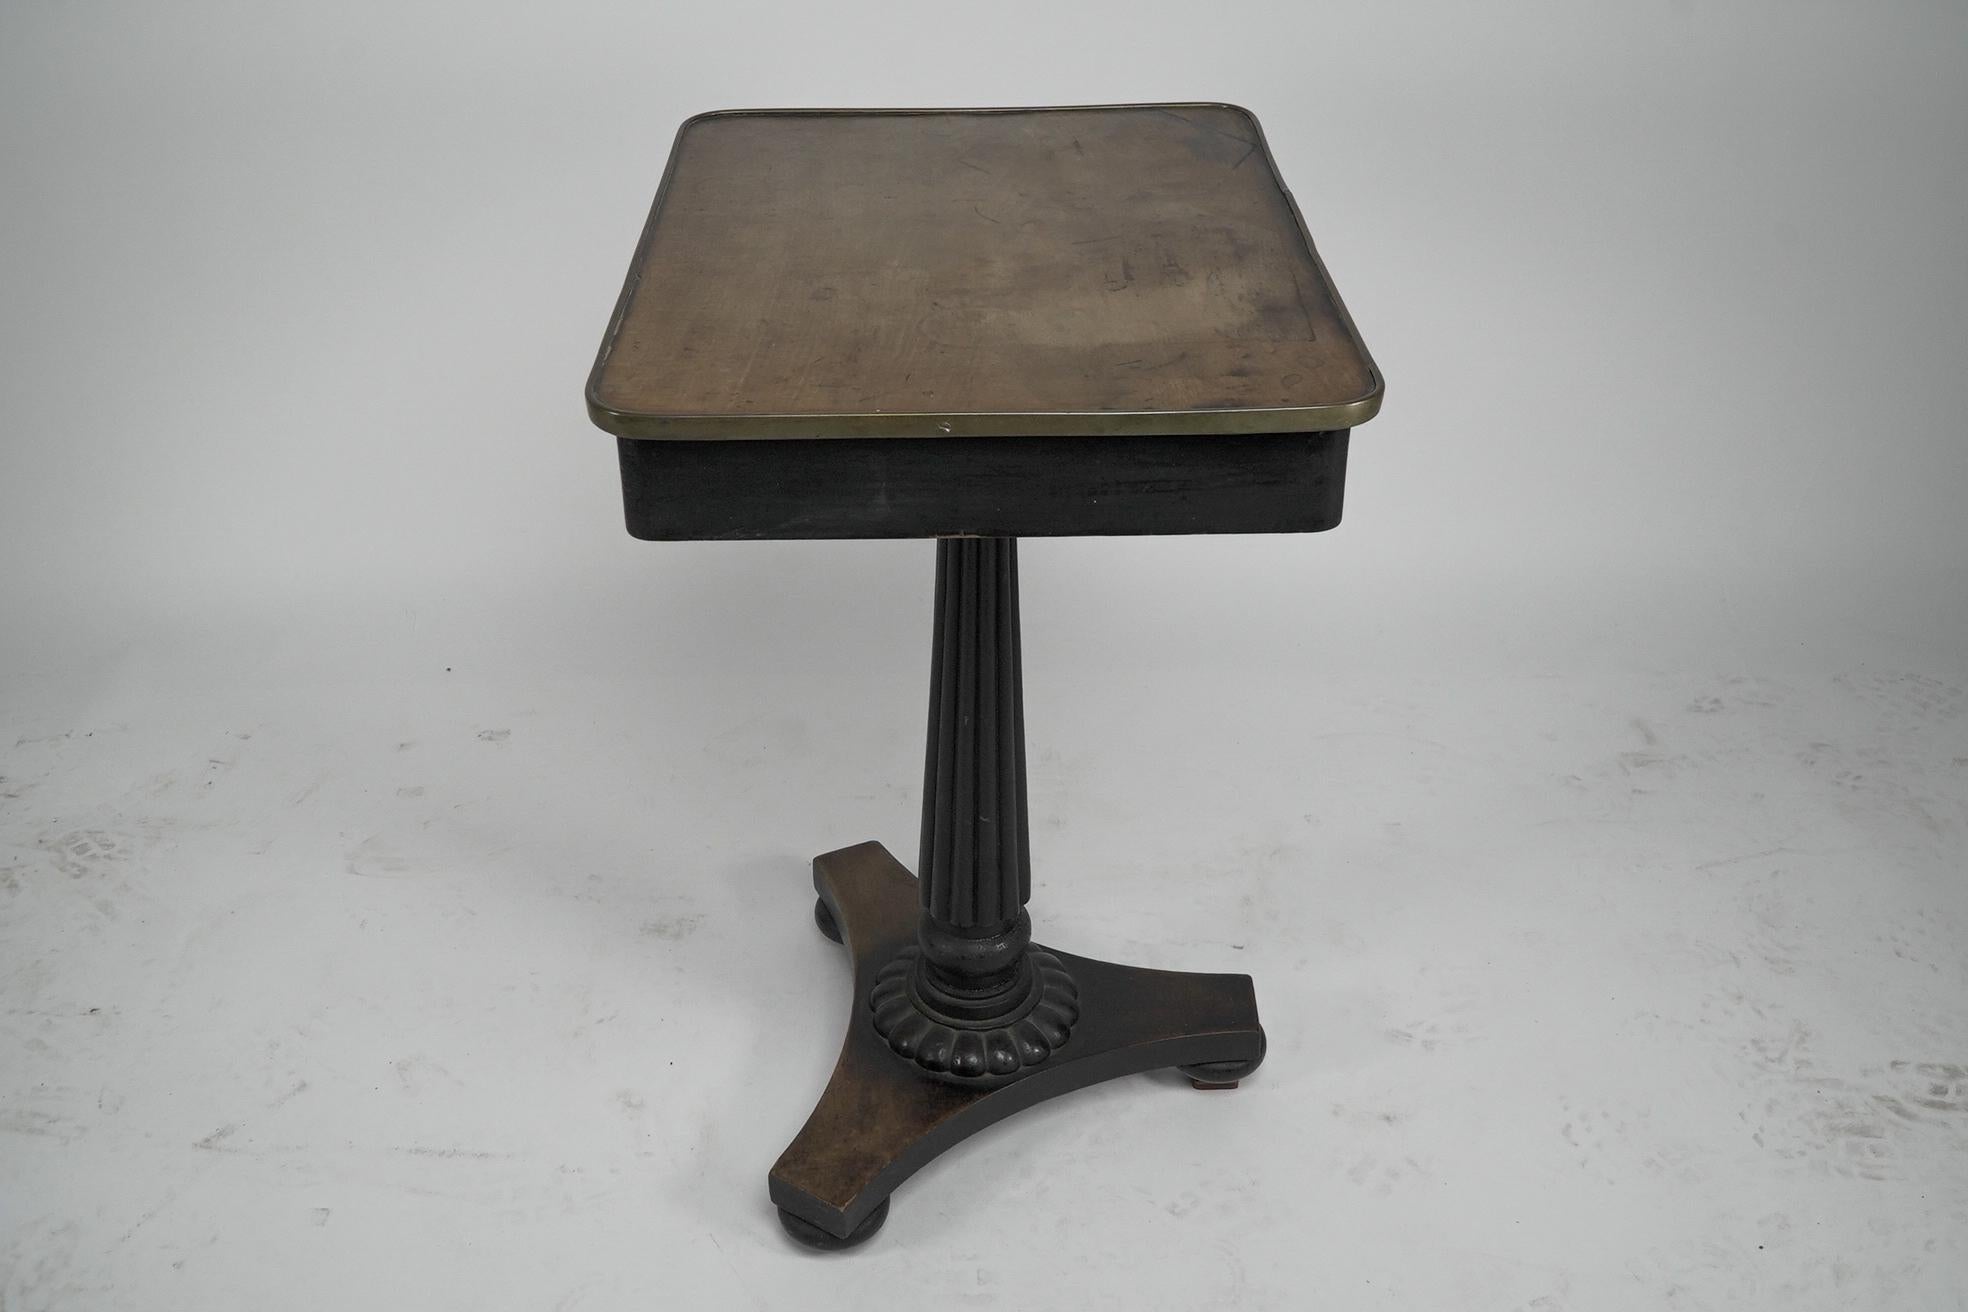 An early to mid-Victorian mahogany and satinwood top single drawer pedestal occasional table. A brass edge to the satinwood top and a brass pull handle with a floral backplate to the drawer, raised on a single tapering fluted upright pillar with a